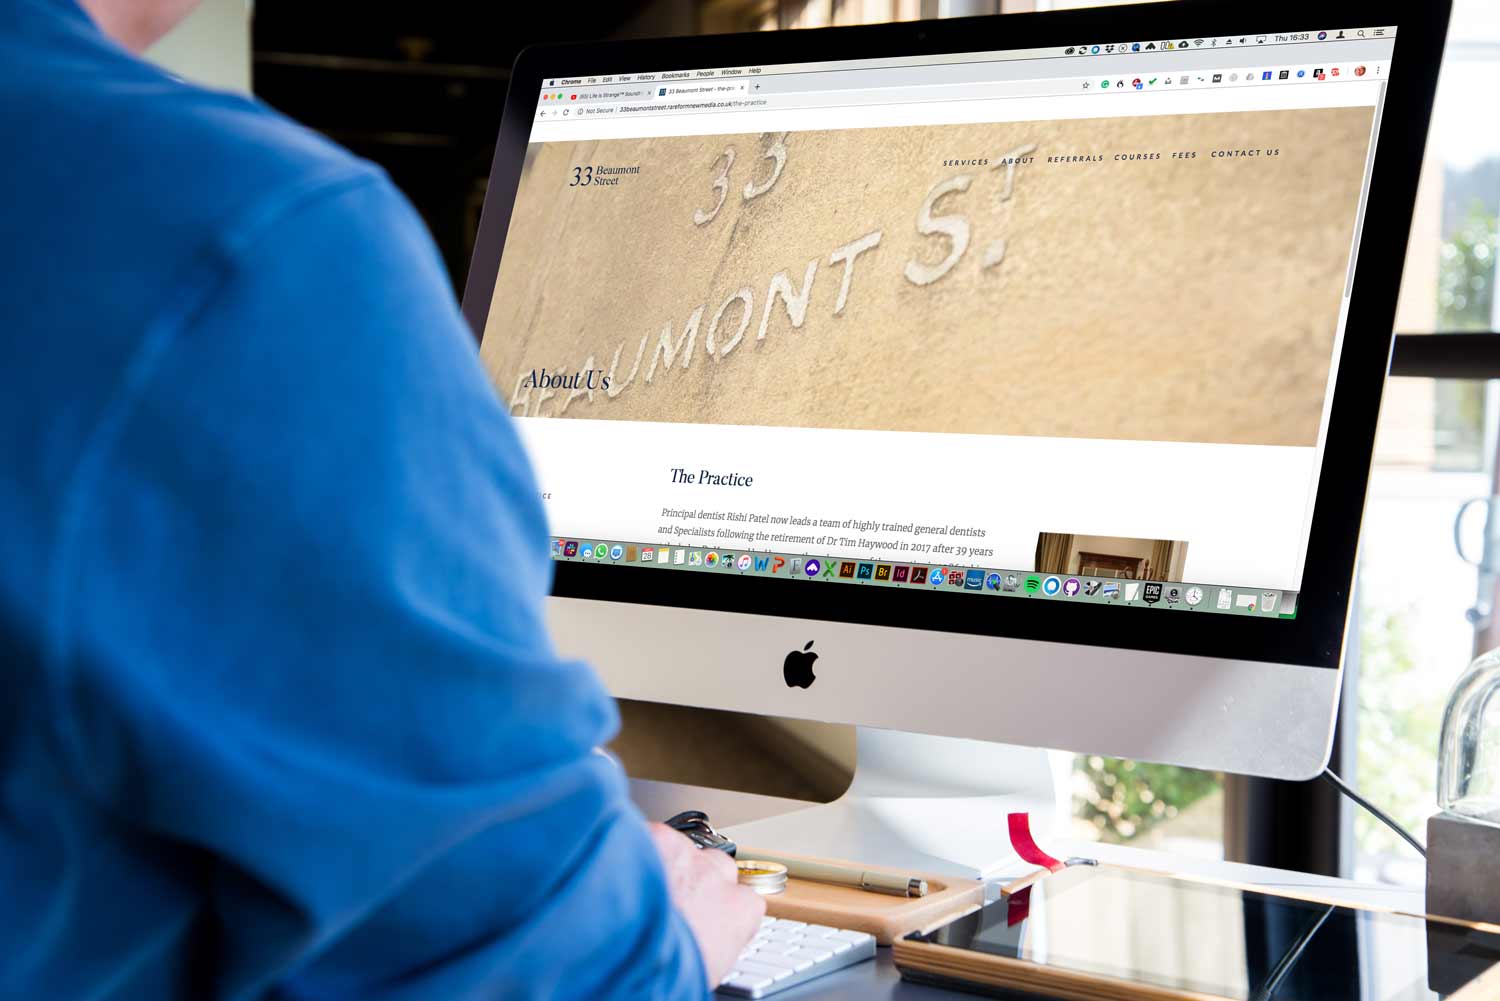 The 33 Beaumont Street website displayed on an iMac